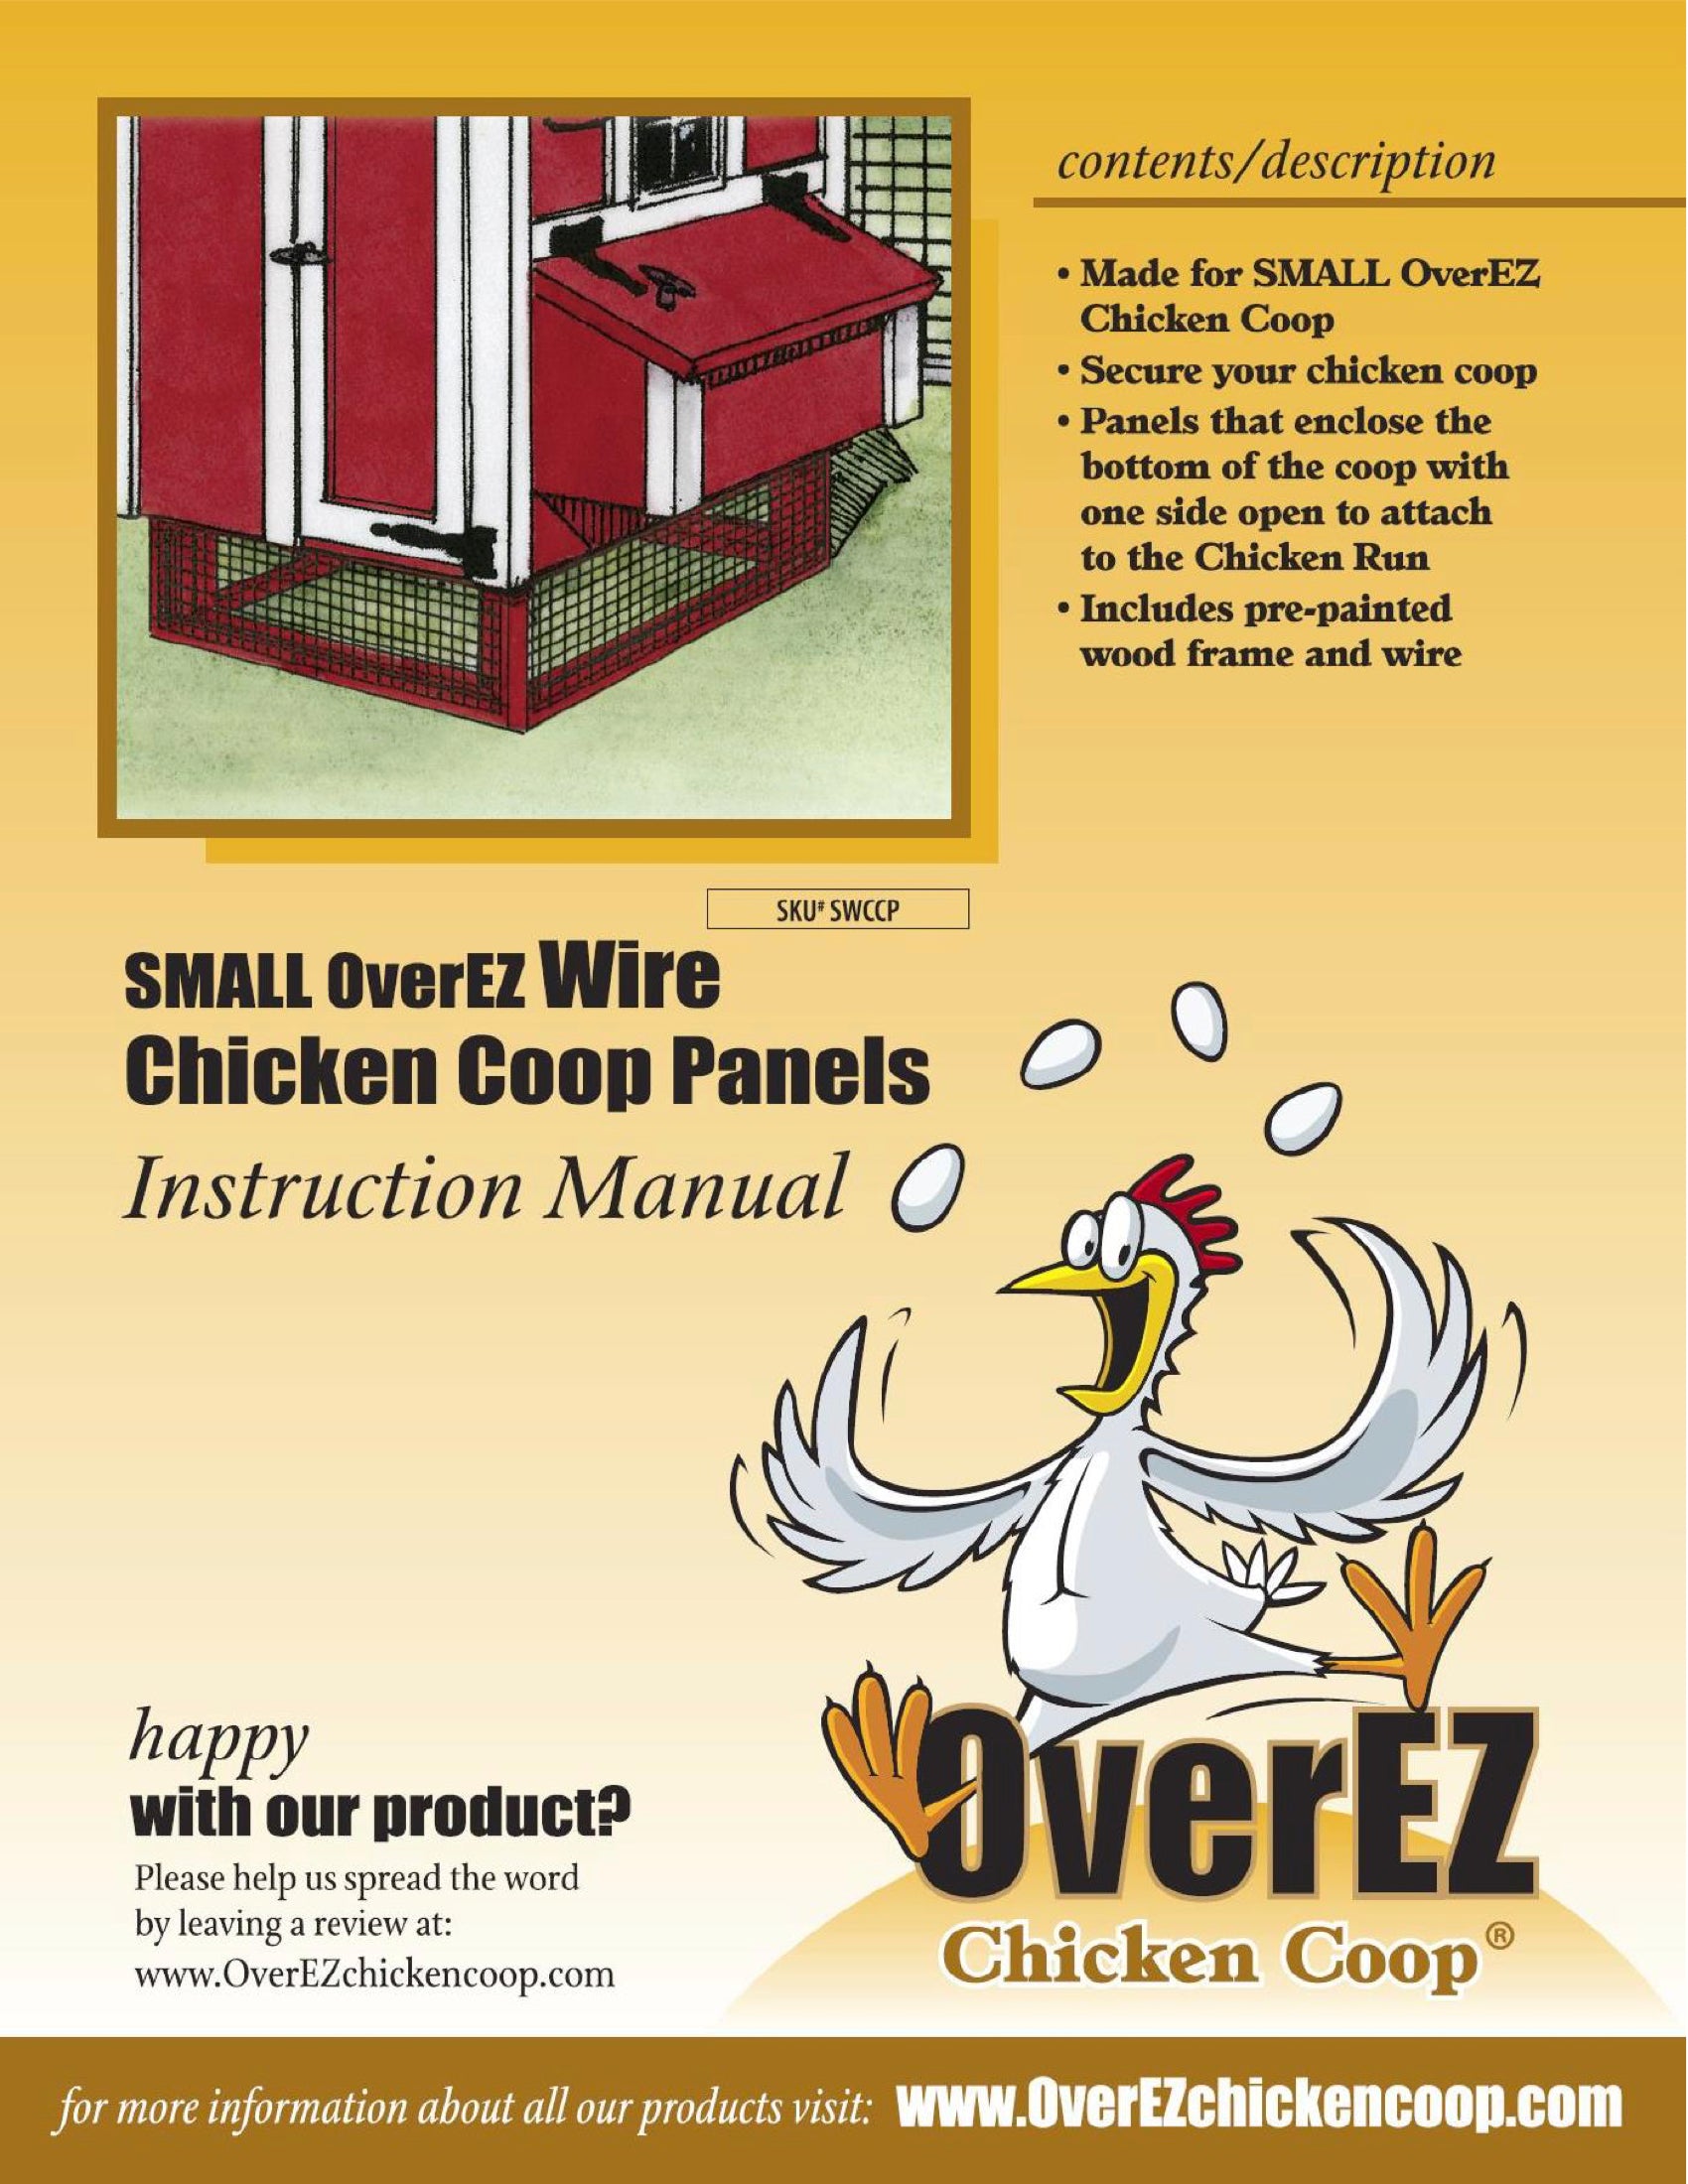 Small OverEZ Wire Chicken Coop Panels Instructions